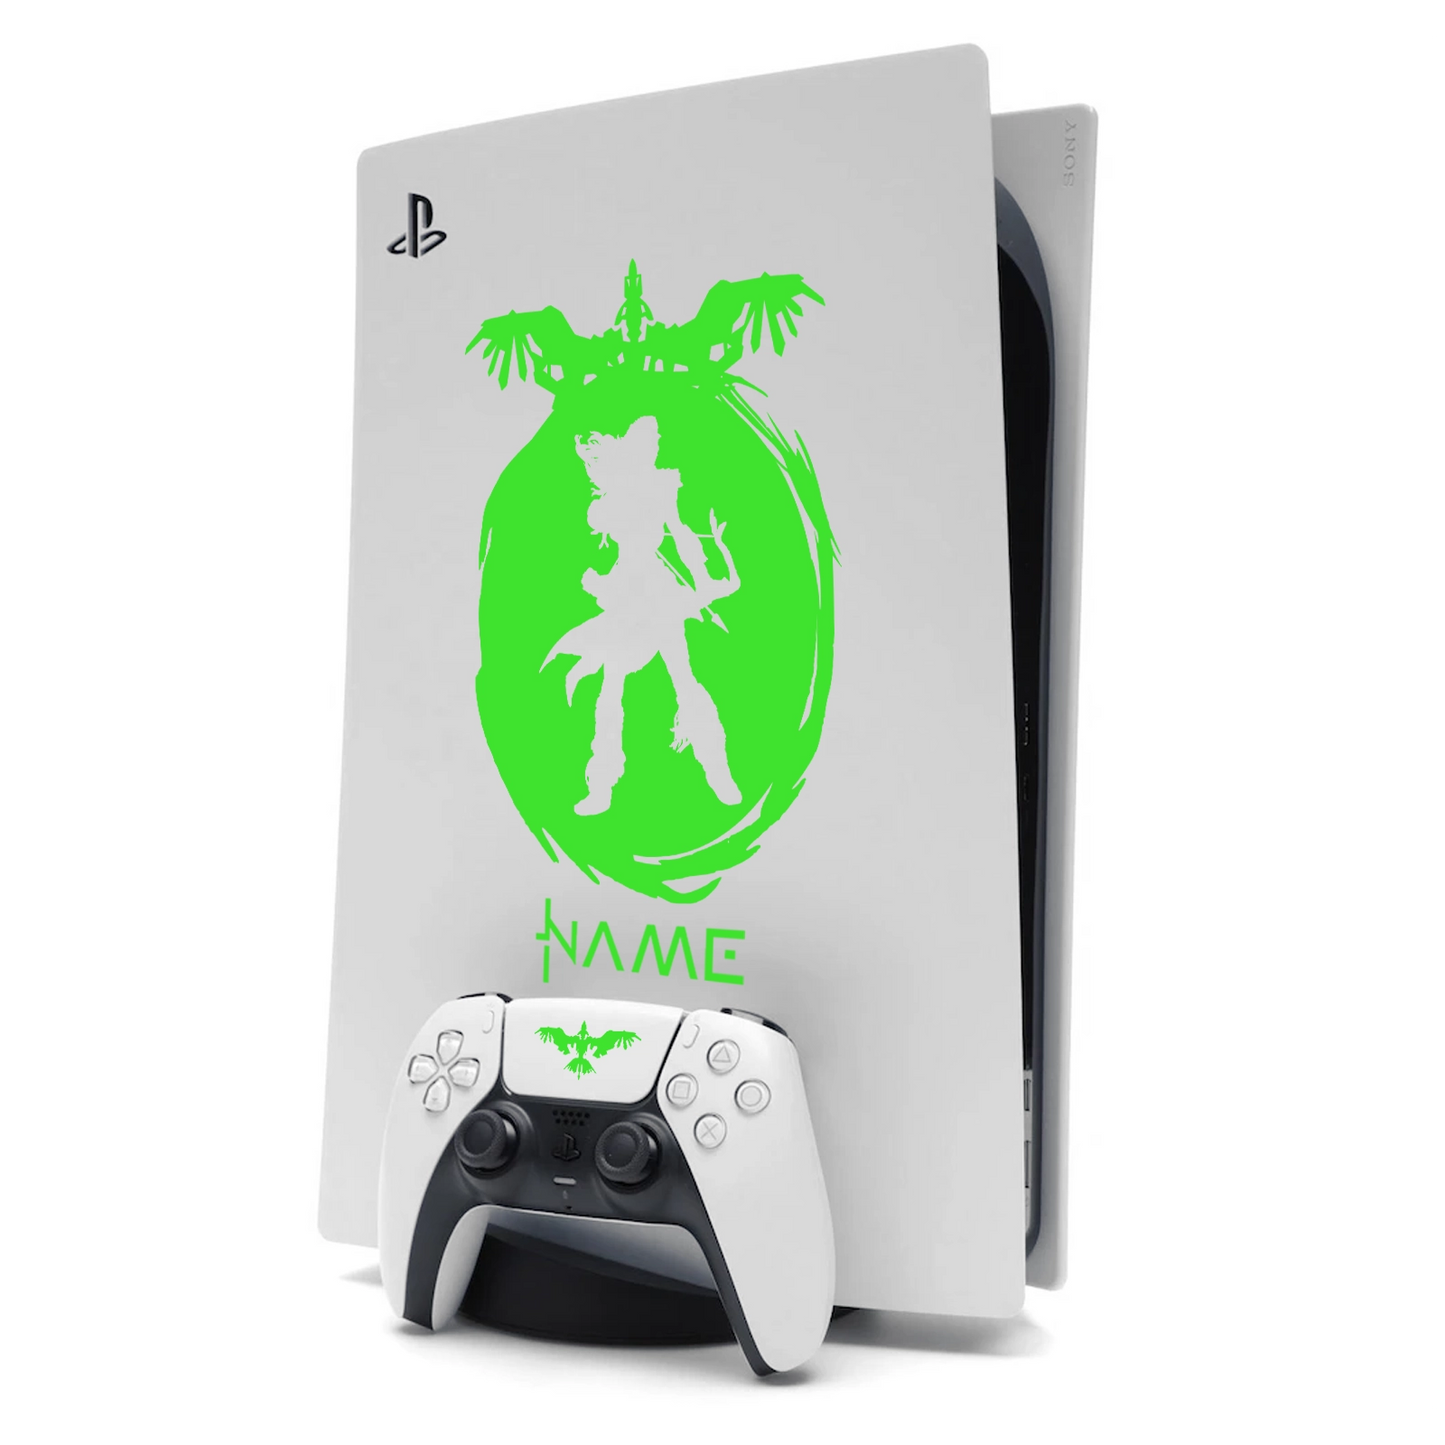 Horizon Aloy PS5 Sticker Skin for Playstation 5 in Green